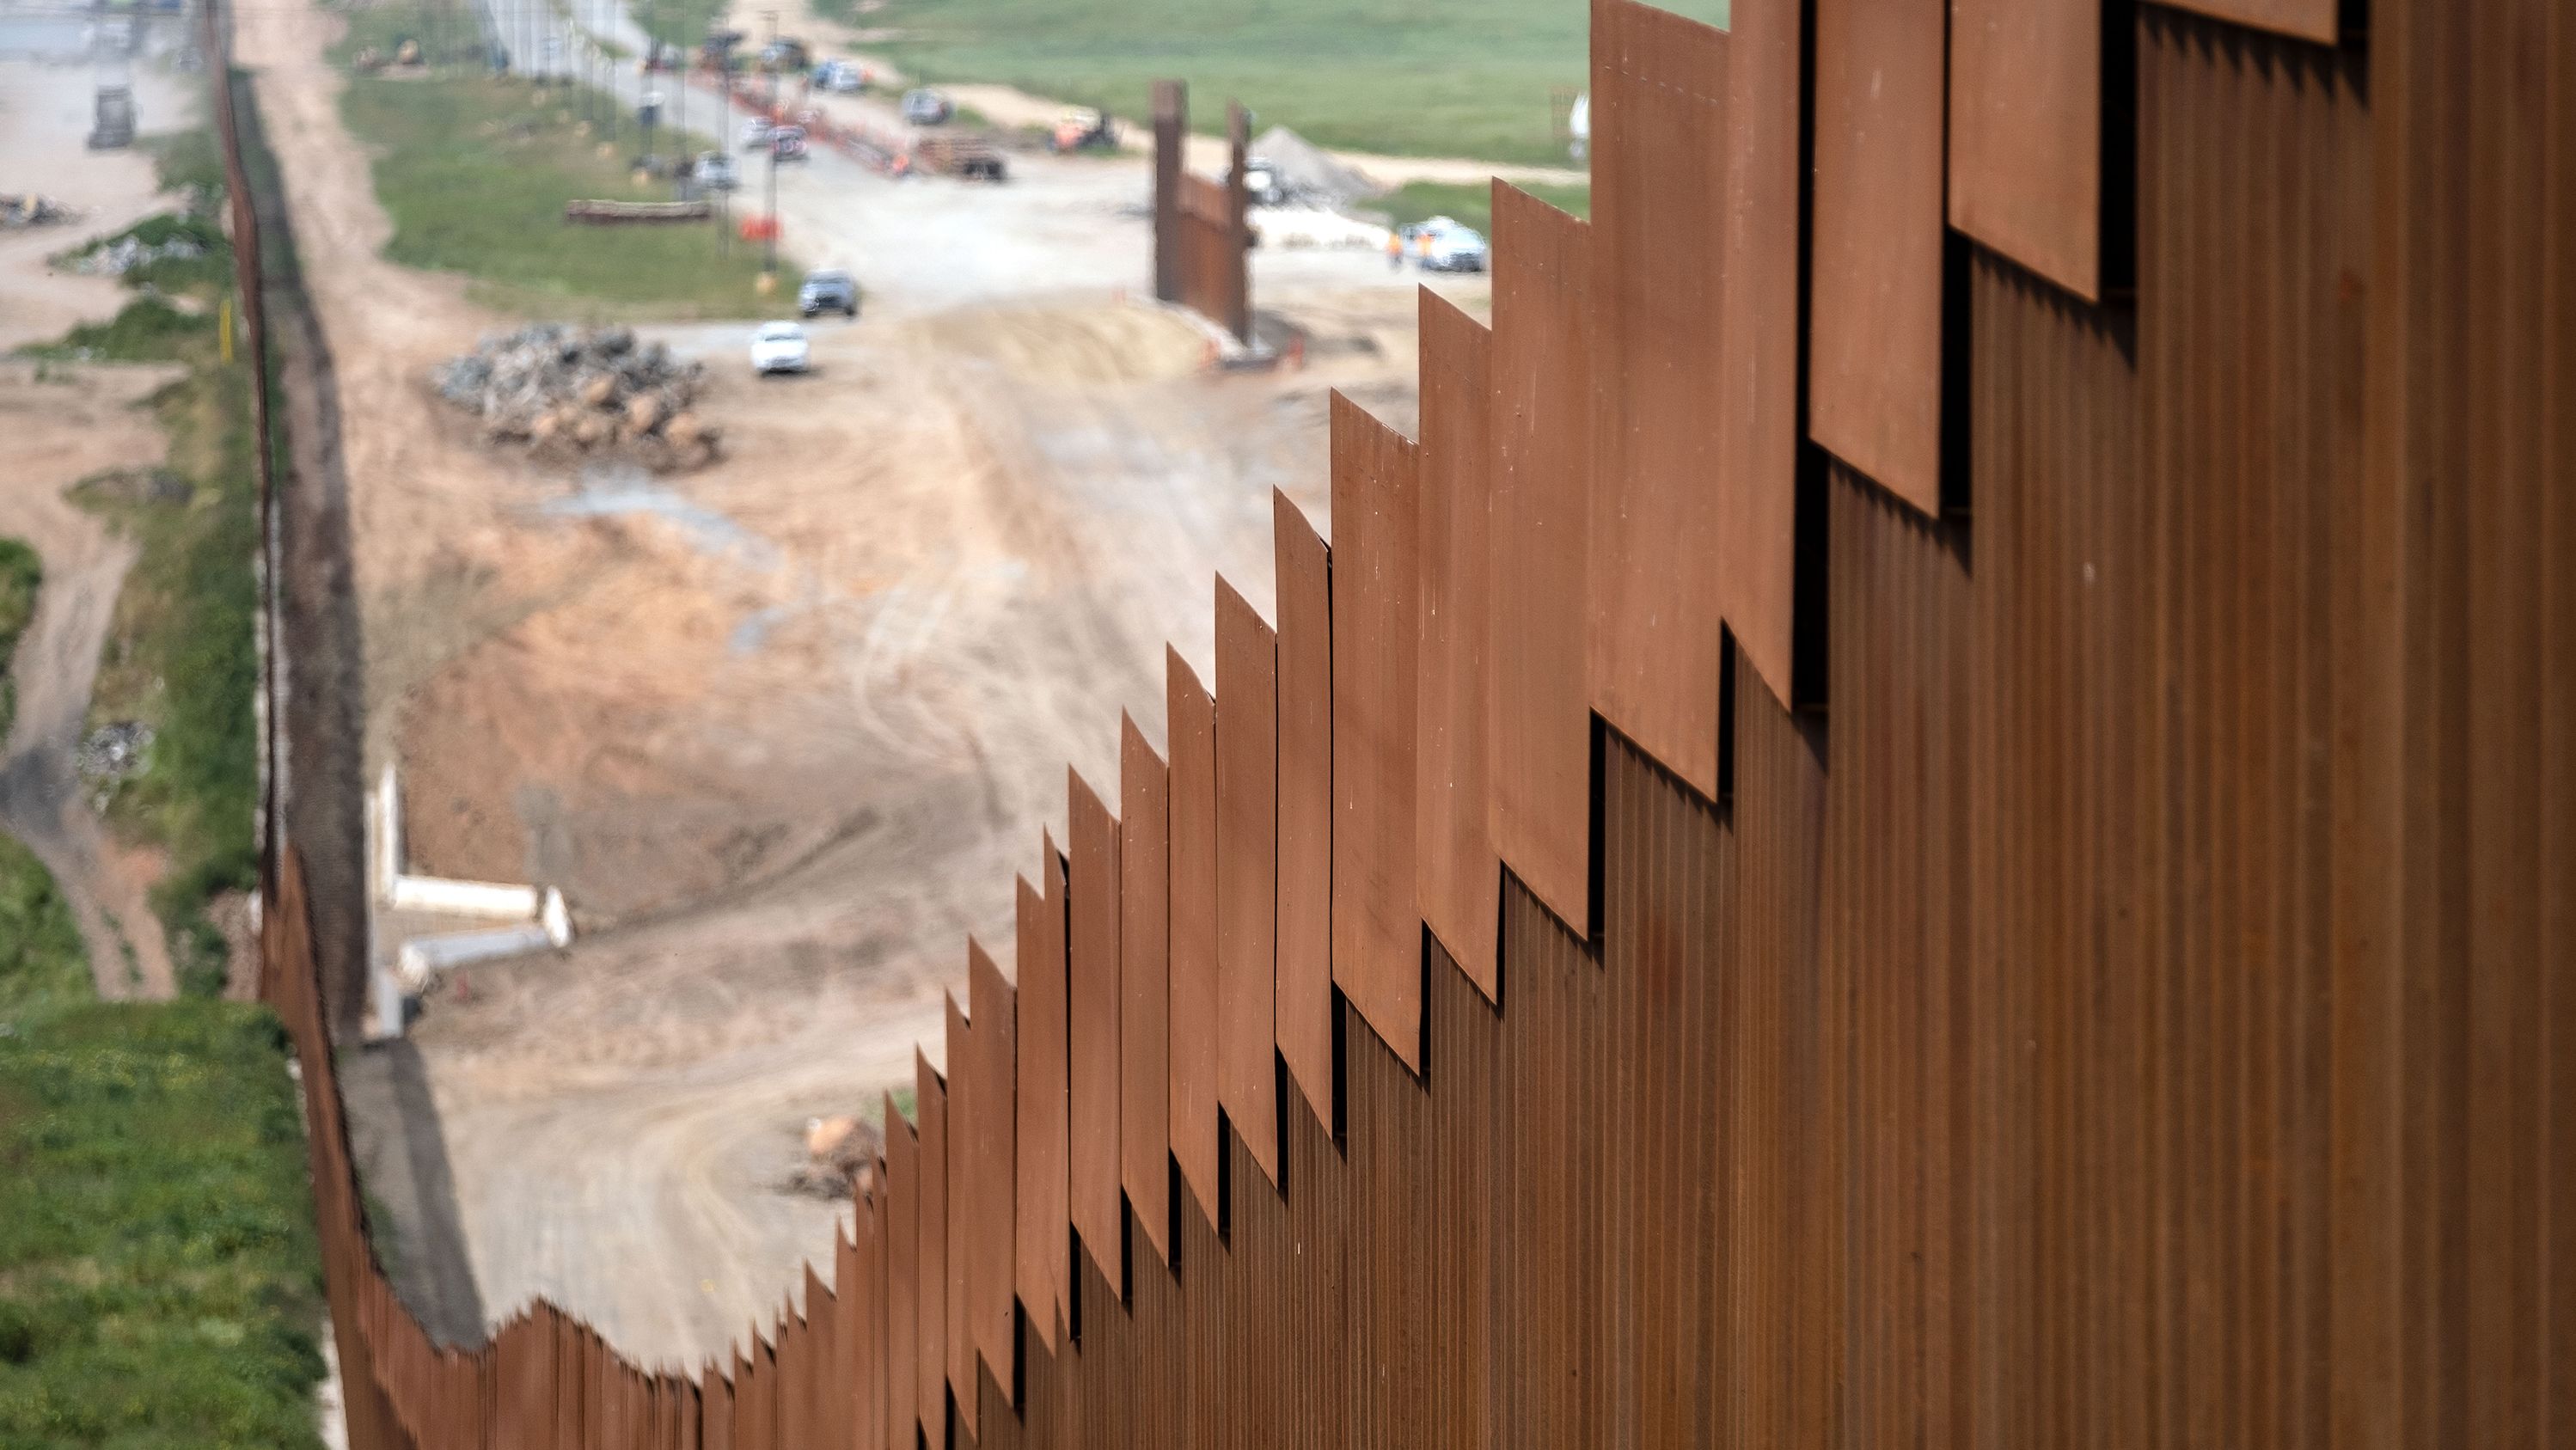 A section of the US-Mexico border fence seen from Tijuana, in Baja California state, Mexico, on March 26, 2019.